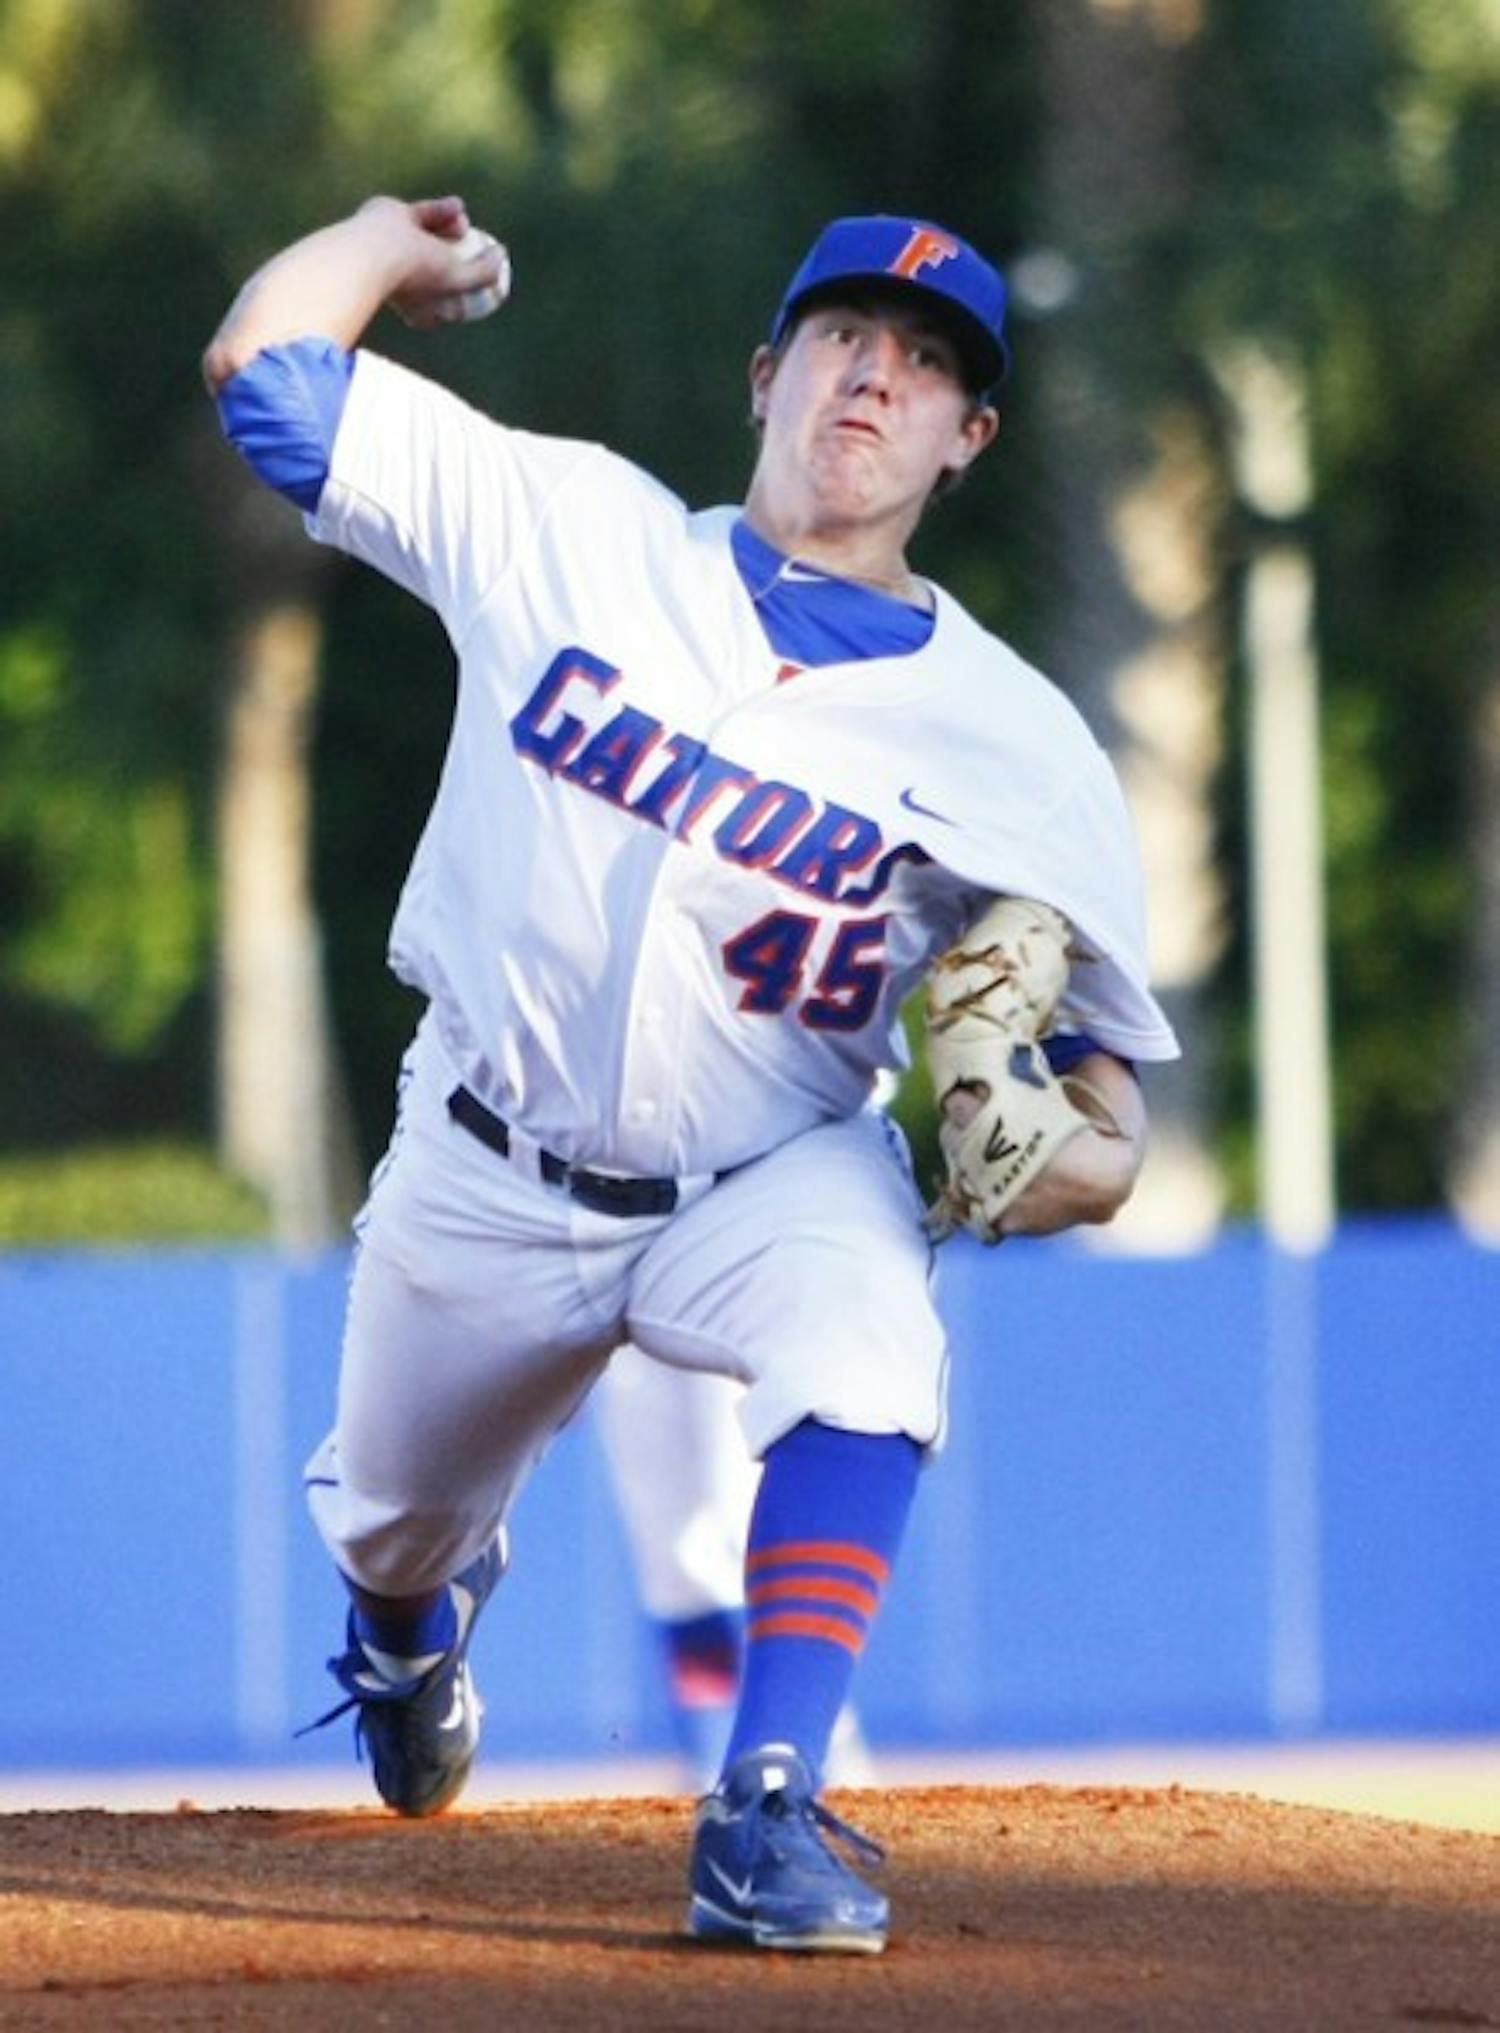 Johnny Magliozzi pitches against USF on April 24, 2012. Magliozzi announced Monday that he would sign with the New York Mets and leave UF after two seasons.&nbsp;